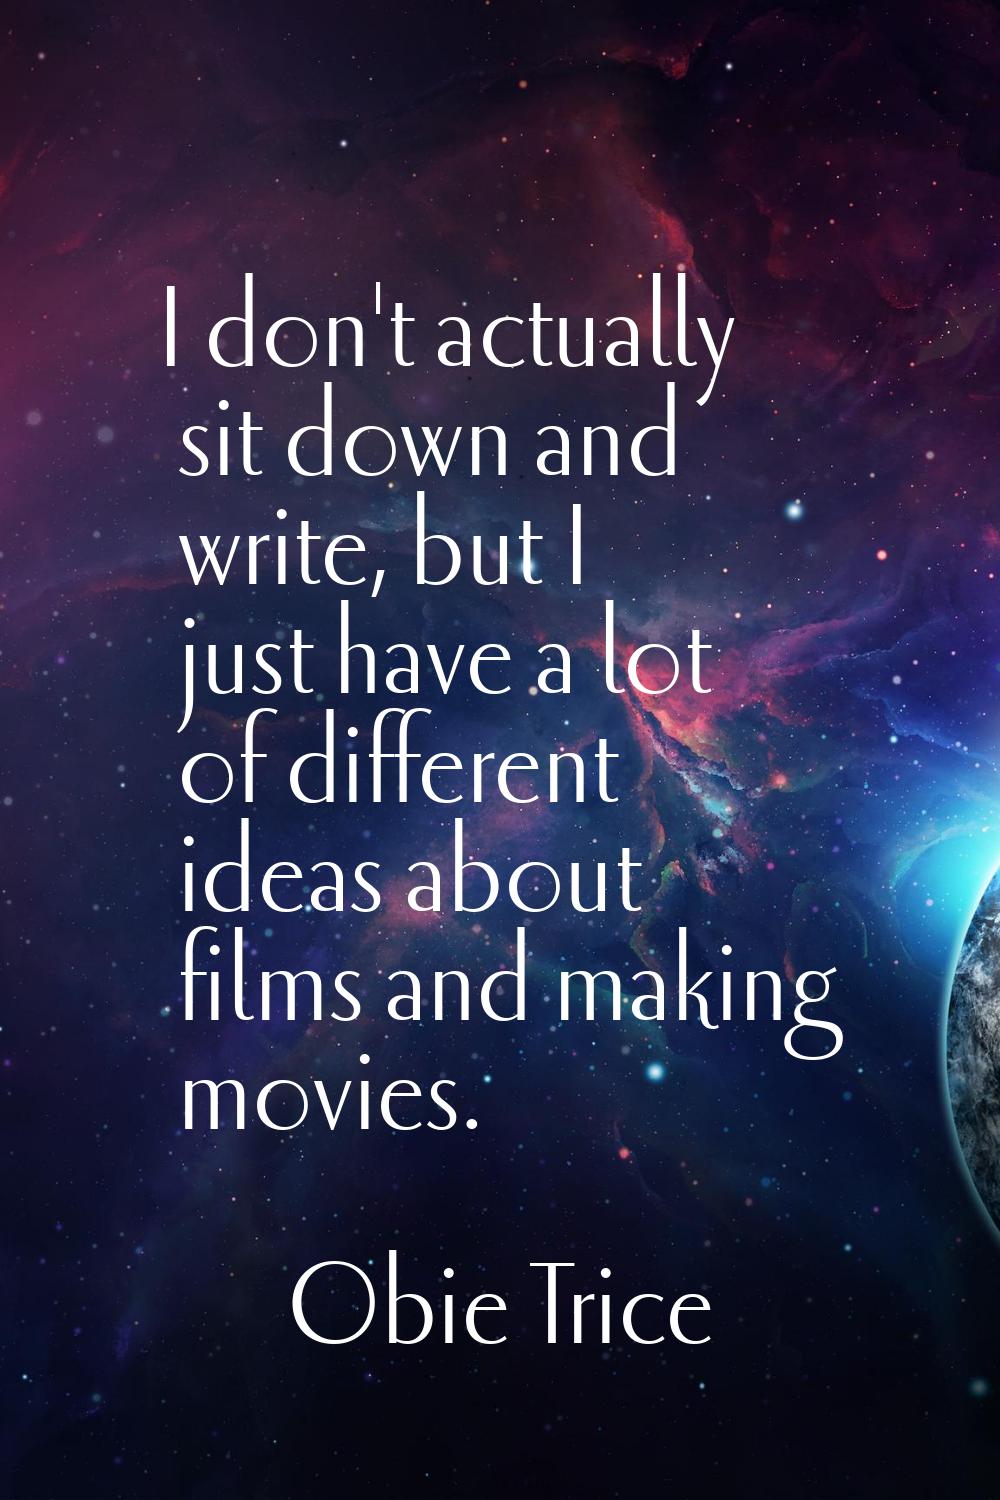 I don't actually sit down and write, but I just have a lot of different ideas about films and makin